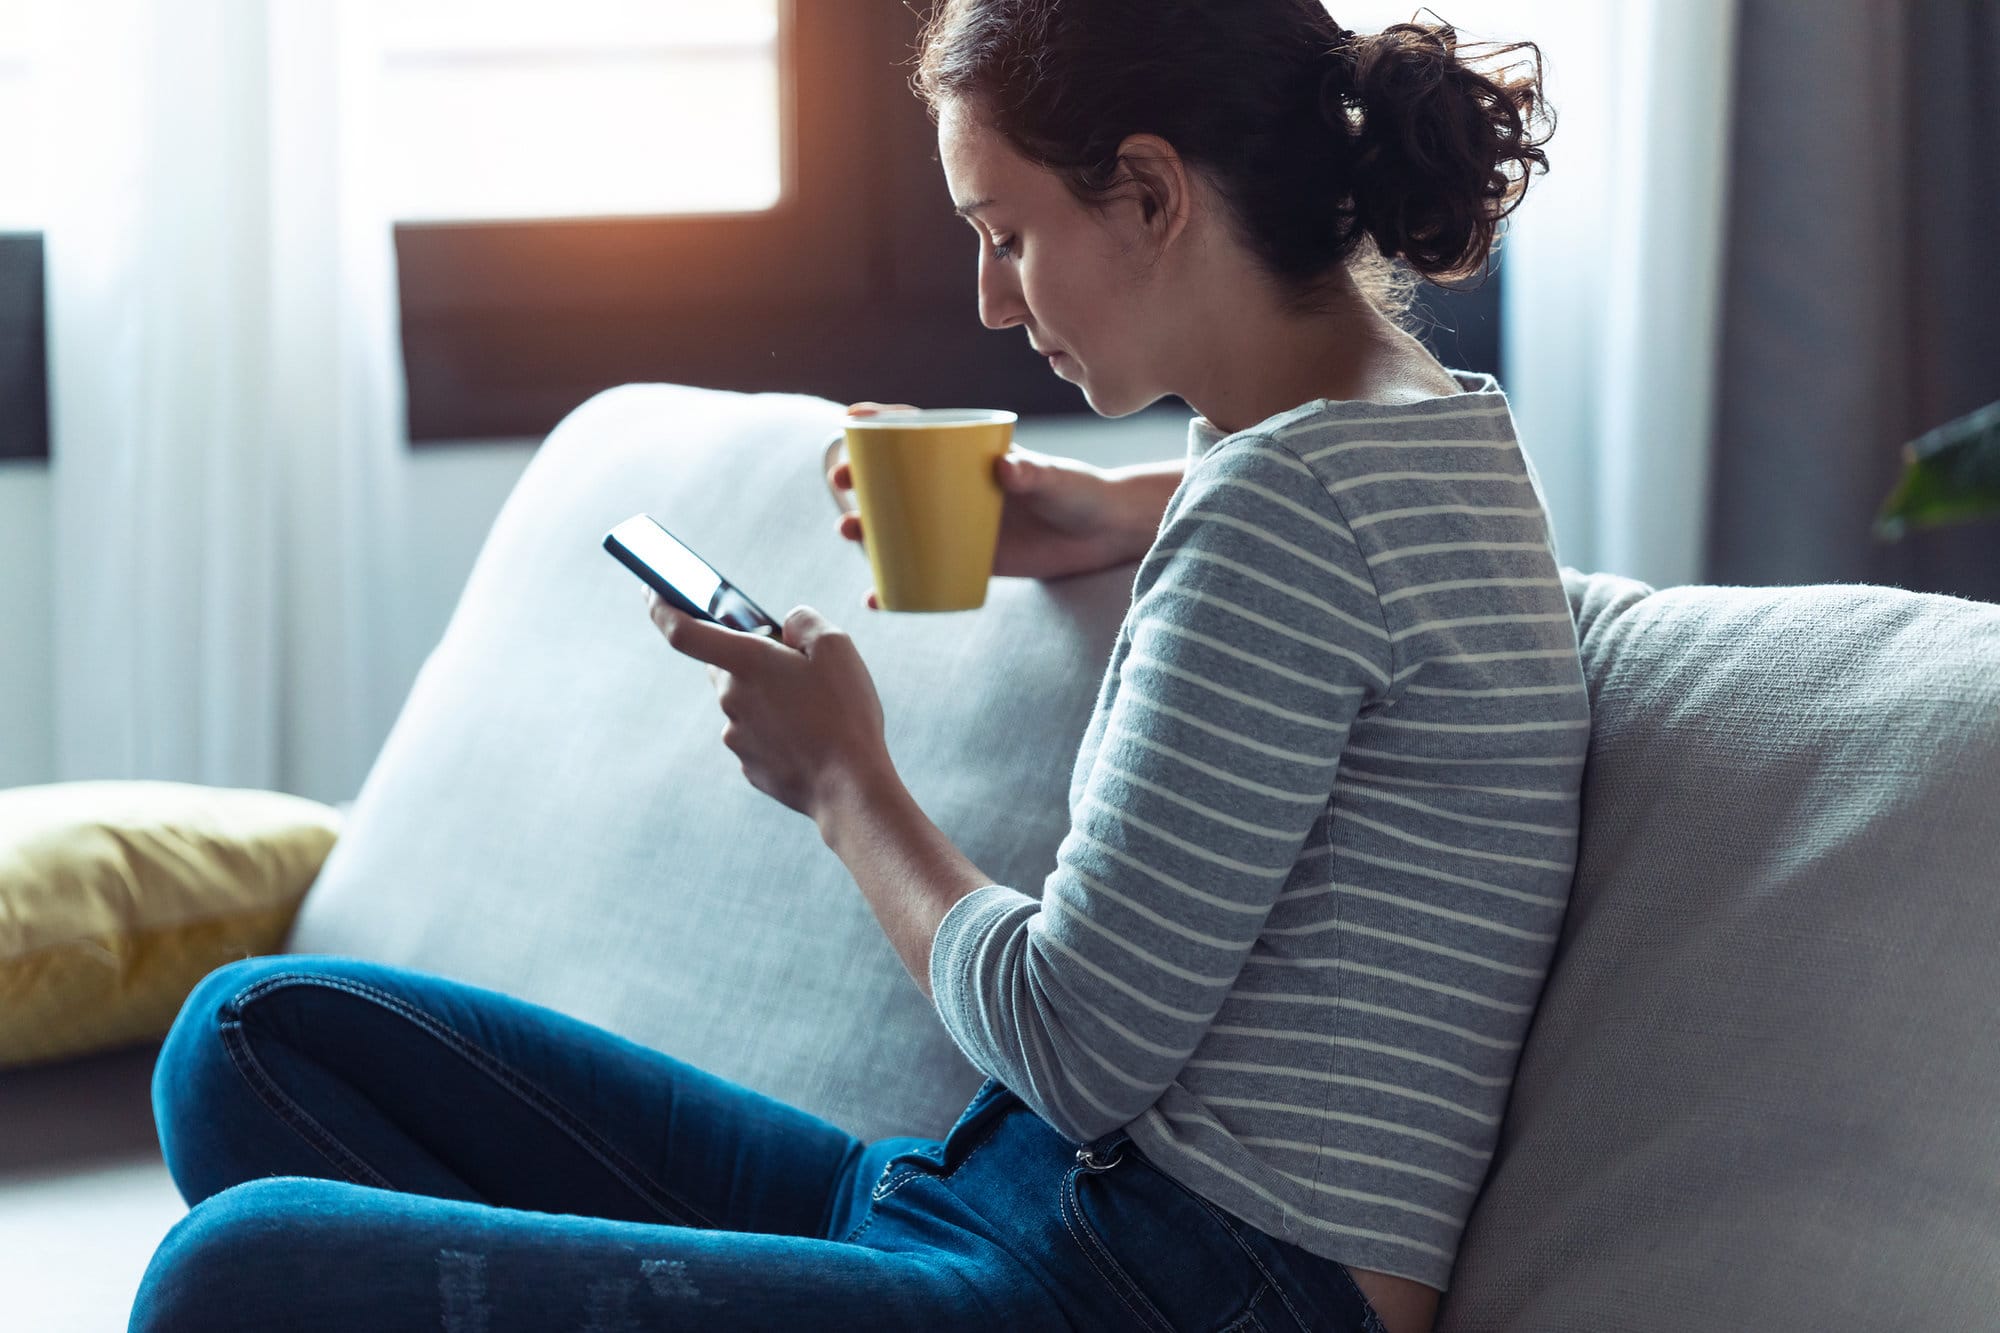 woman sat on sofa looking at phone in one hand and holding a cup of tea in another